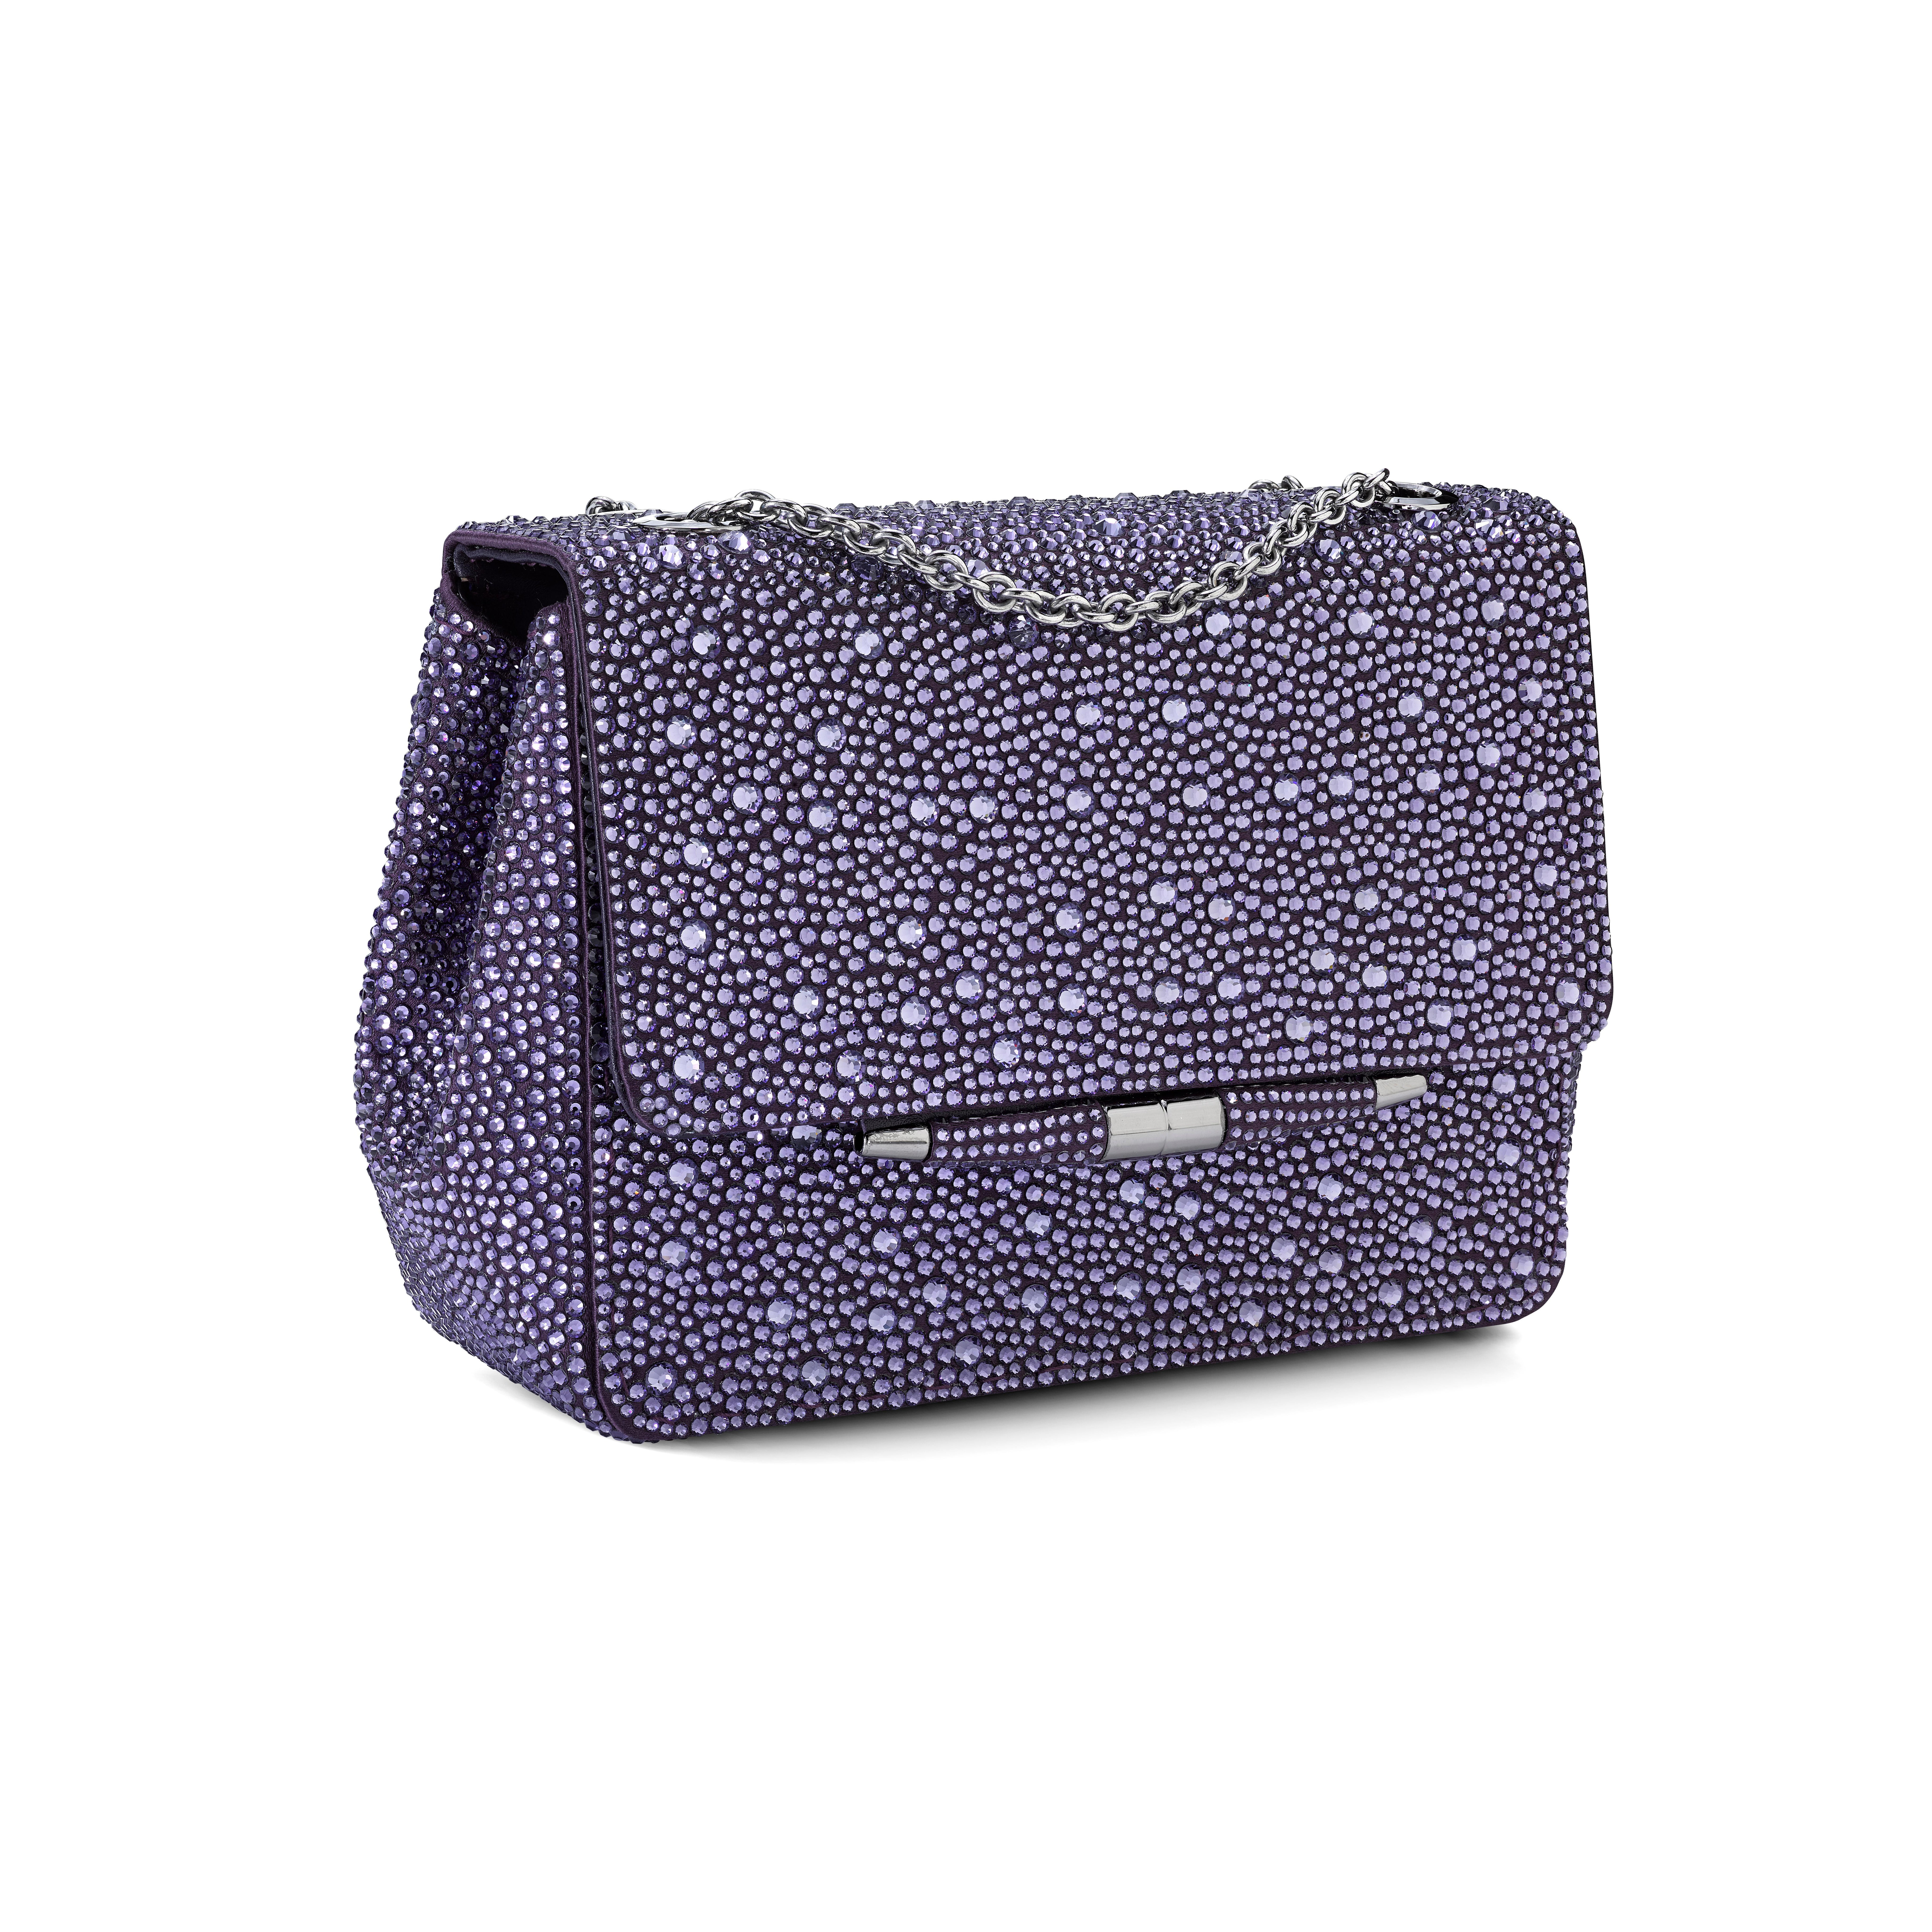 The Tiffany Classica in Amethyst Crystal Medley is a semi-structured rectangular shoulder bag with a front flap finished with a magnetic snap closure and our custom Infinity Bar. The bag fits the large iPhone, is designed with a gunmetal chain with